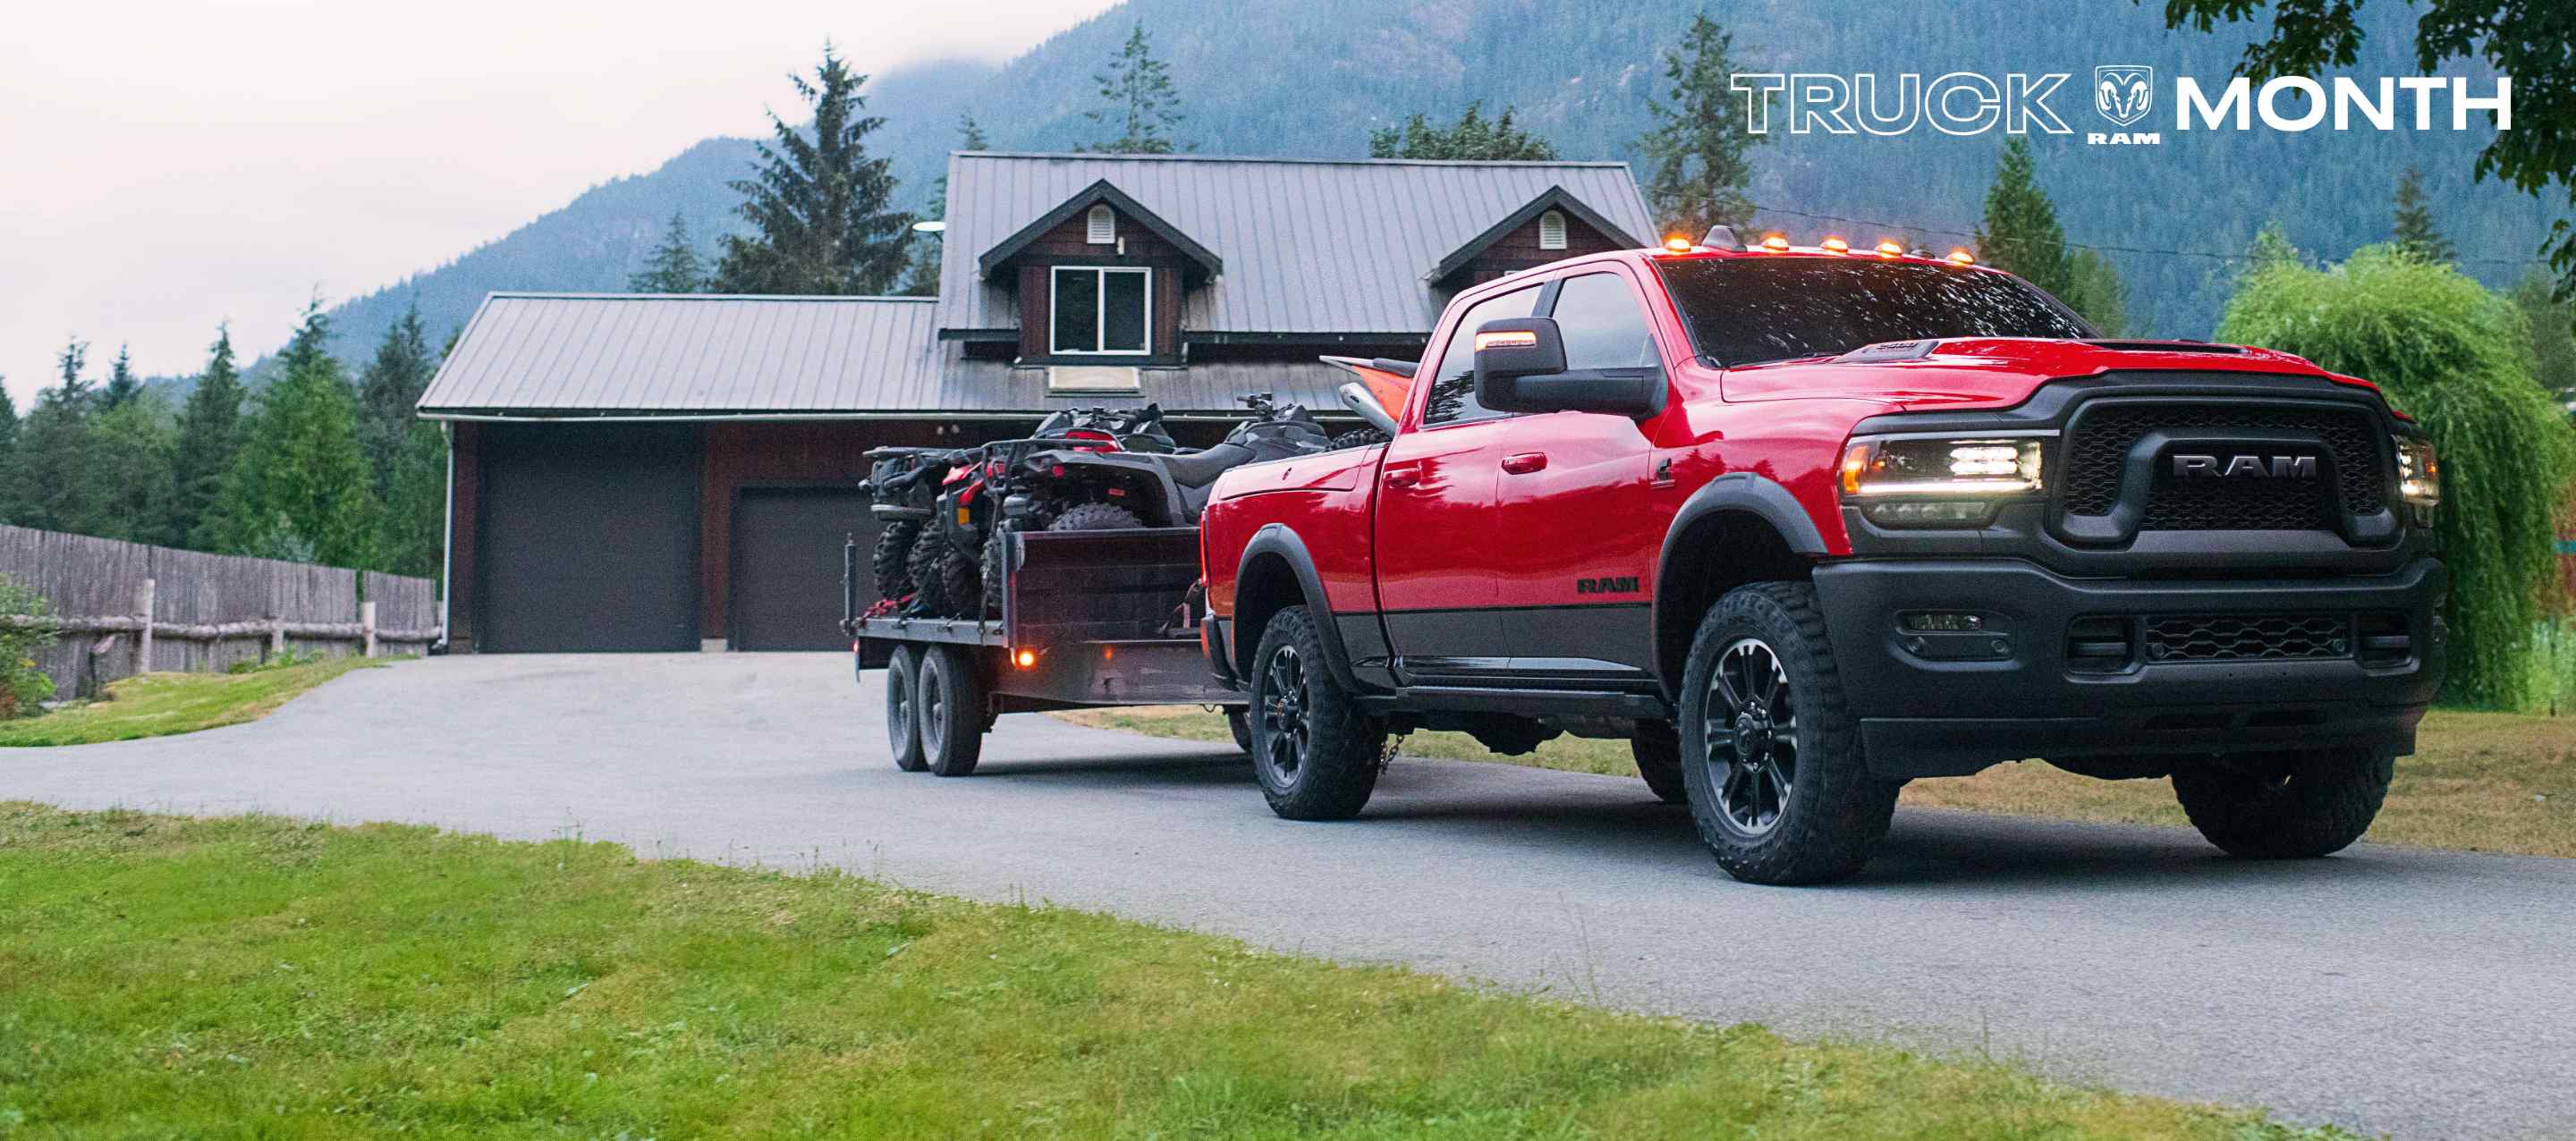 A red Ram 2500 Rebel 4x4 Crew Cab with the diesel engine, pulling away from a home in the mountains while towing two ATVs on a flatbed trailer. Ram Truck Month.